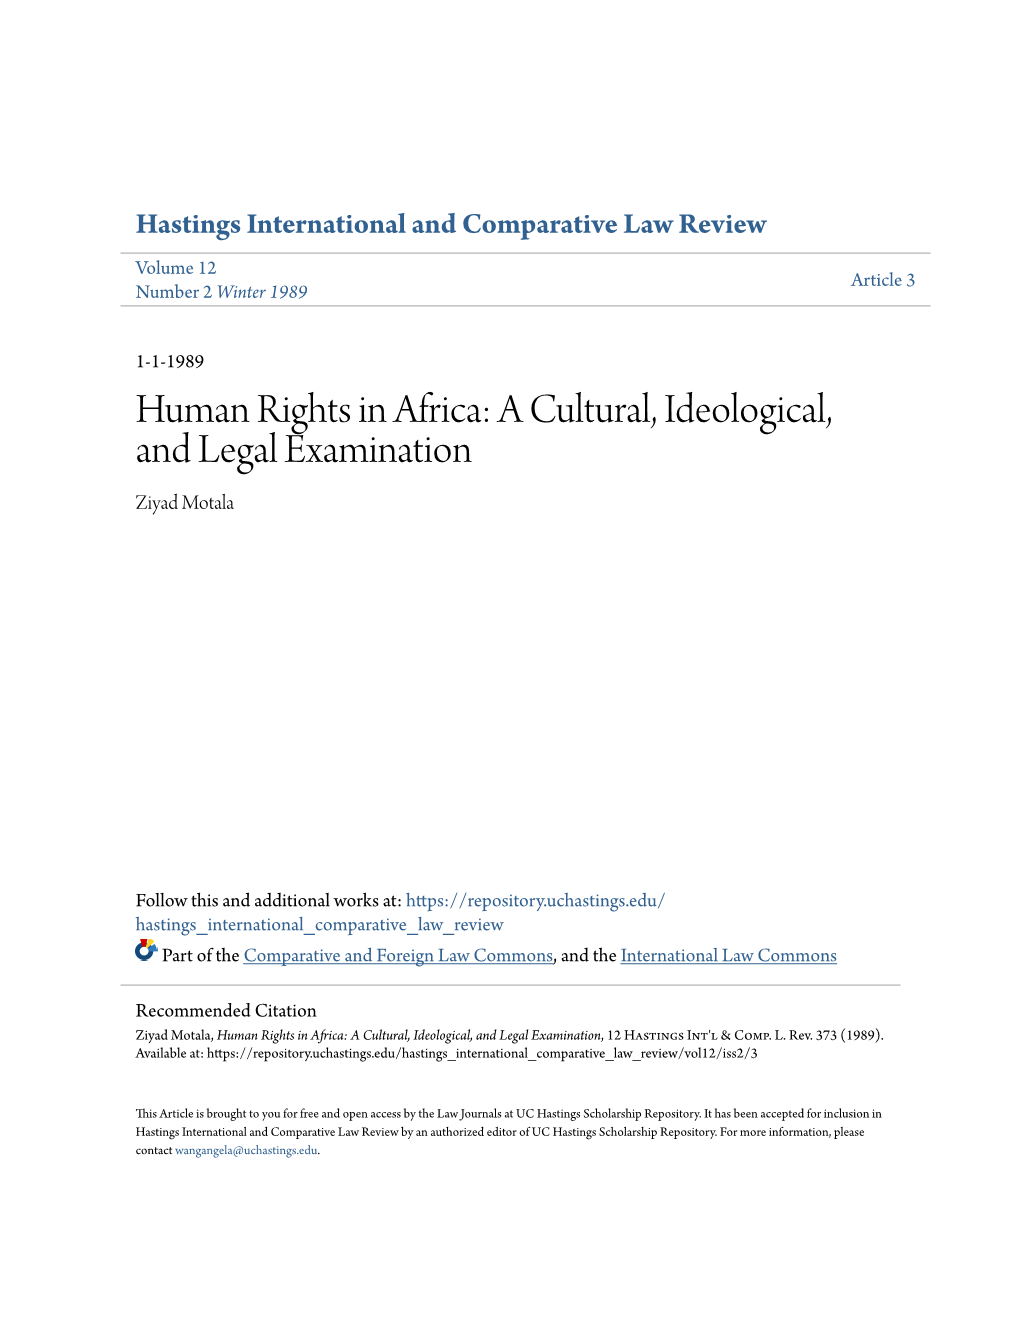 Human Rights in Africa: a Cultural, Ideological, and Legal Examination Ziyad Motala